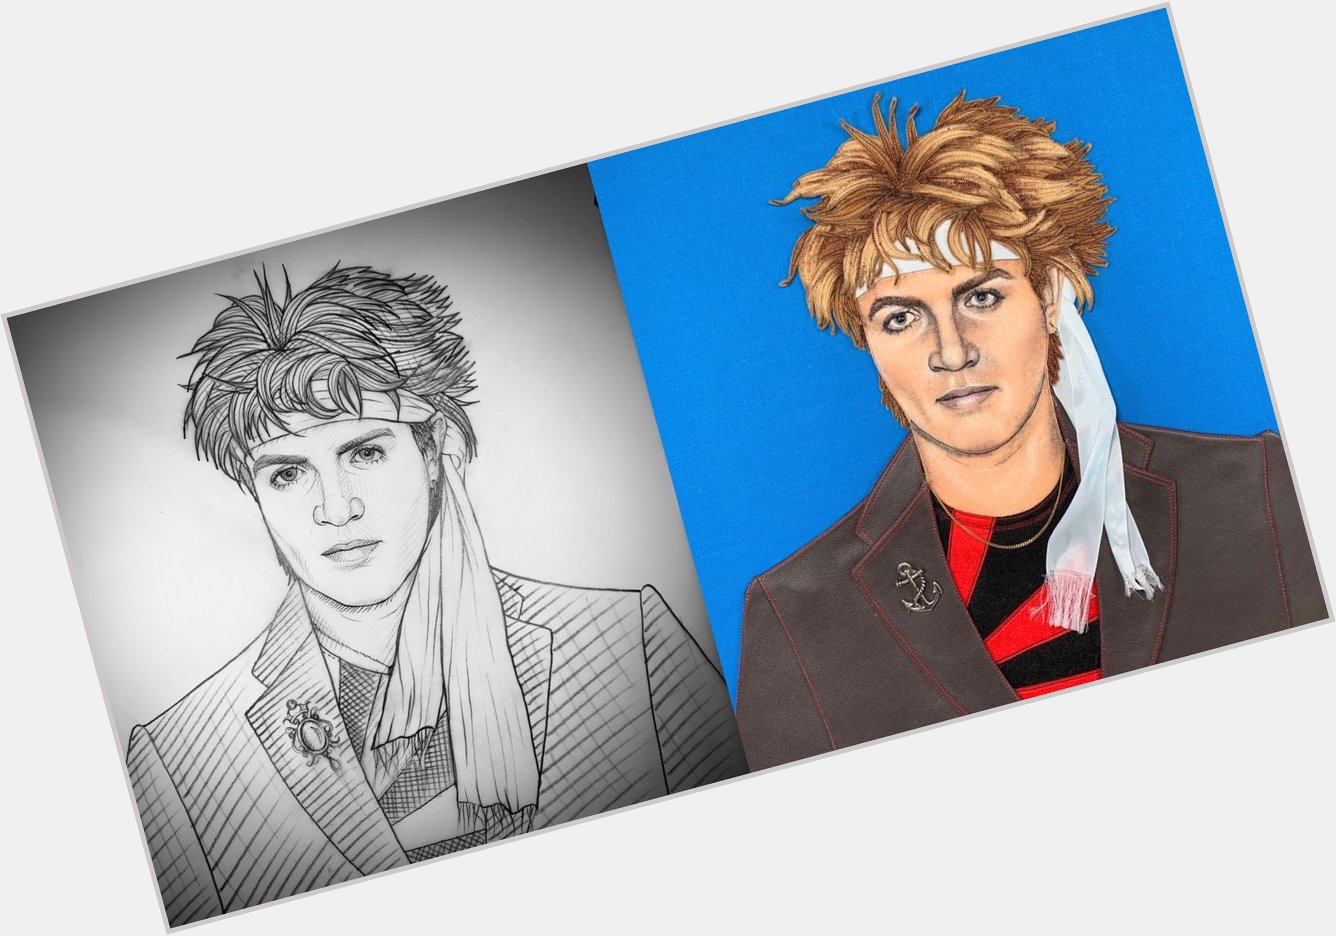 HAPPY BIRTHDAY SIMON LE BON !! HERE IS MY DRAWN PLAN, NEXT TO THE FINISHED SEWN PORTRAIT.  